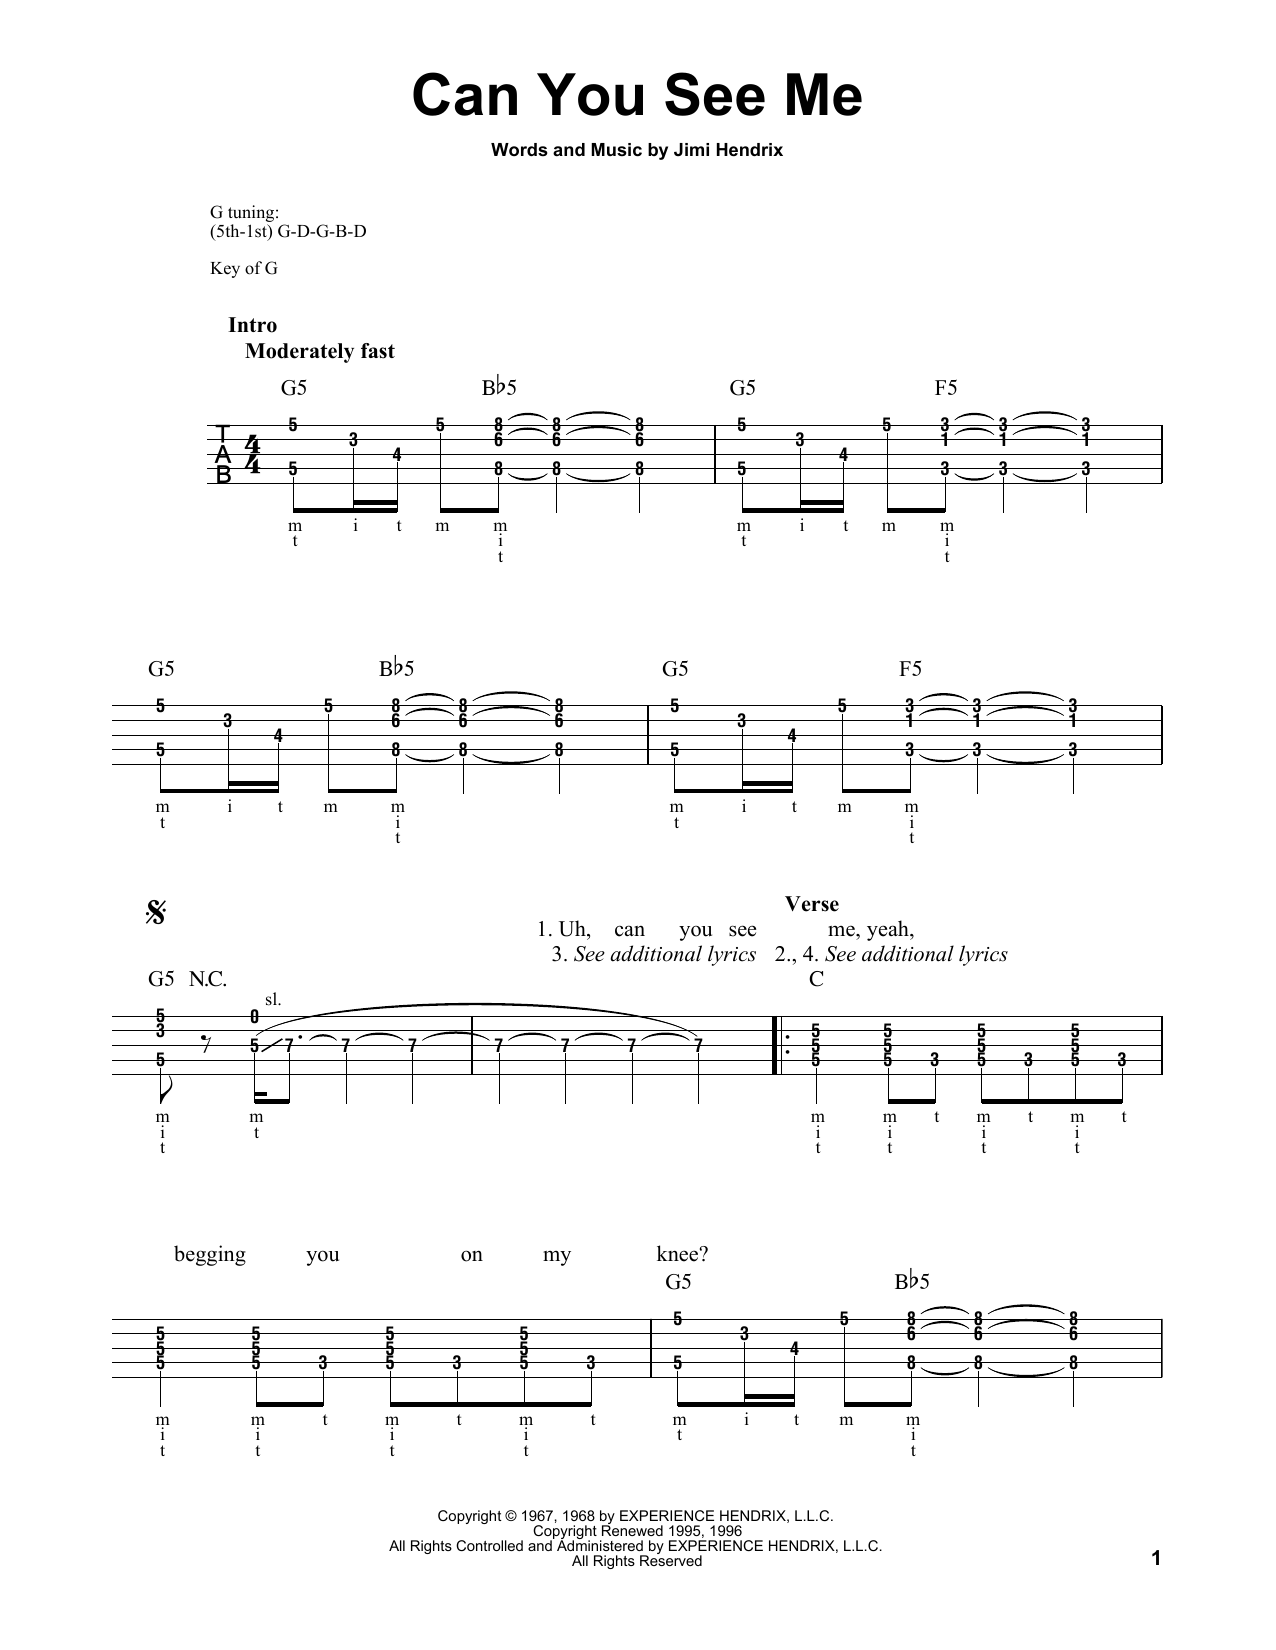 Download Jimi Hendrix Can You See Me Sheet Music